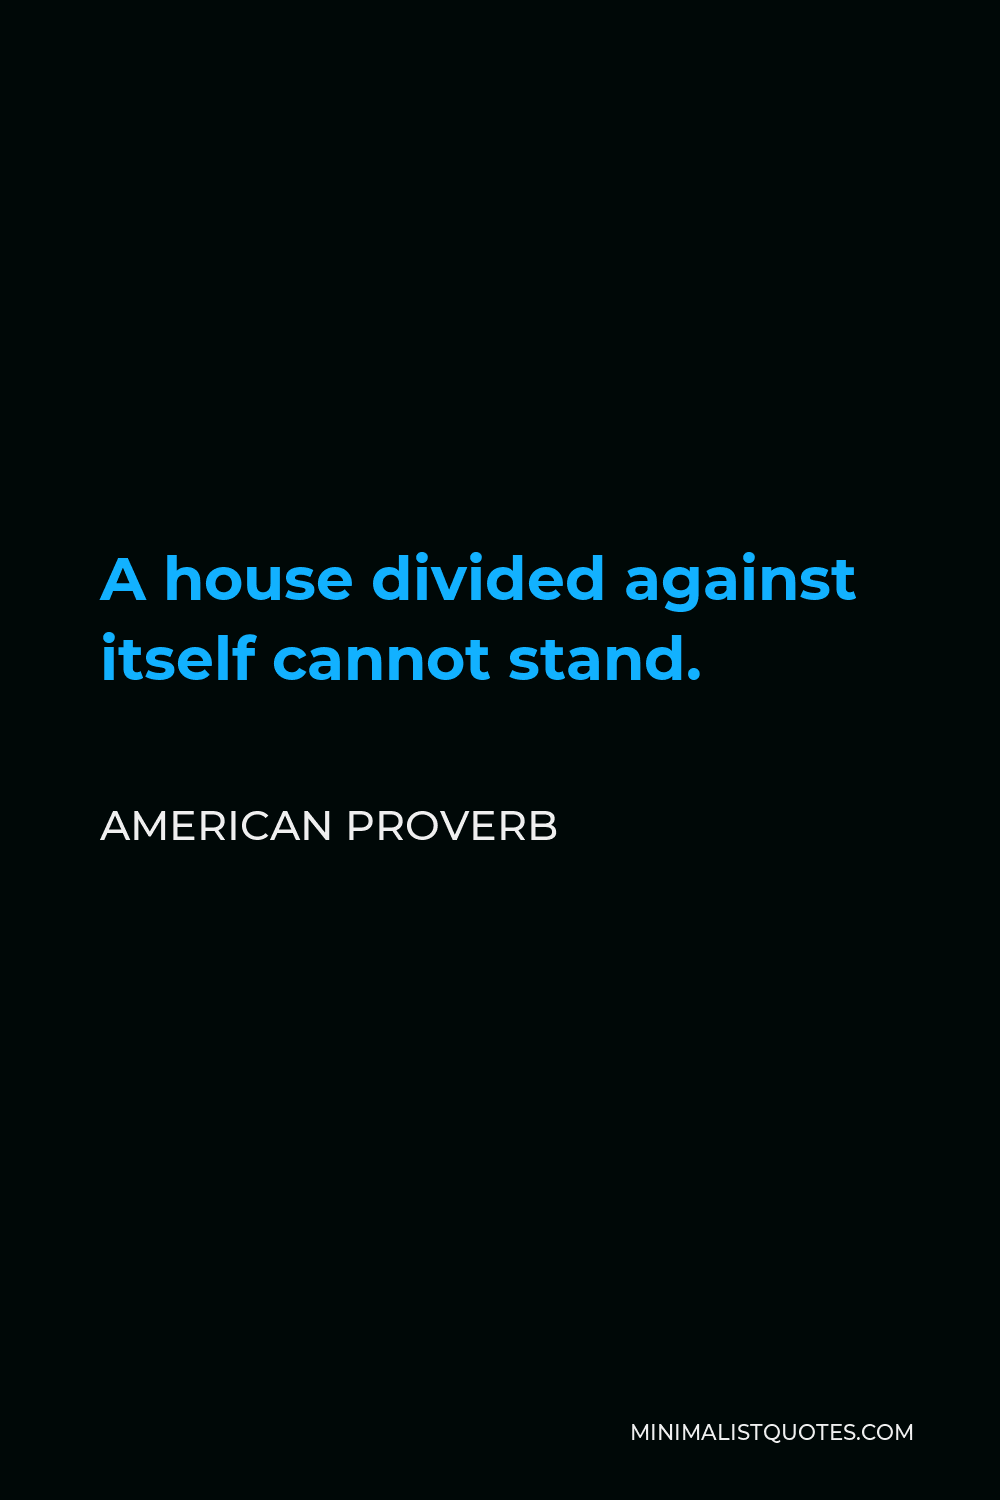 American Proverb Quote - A house divided against itself cannot stand.